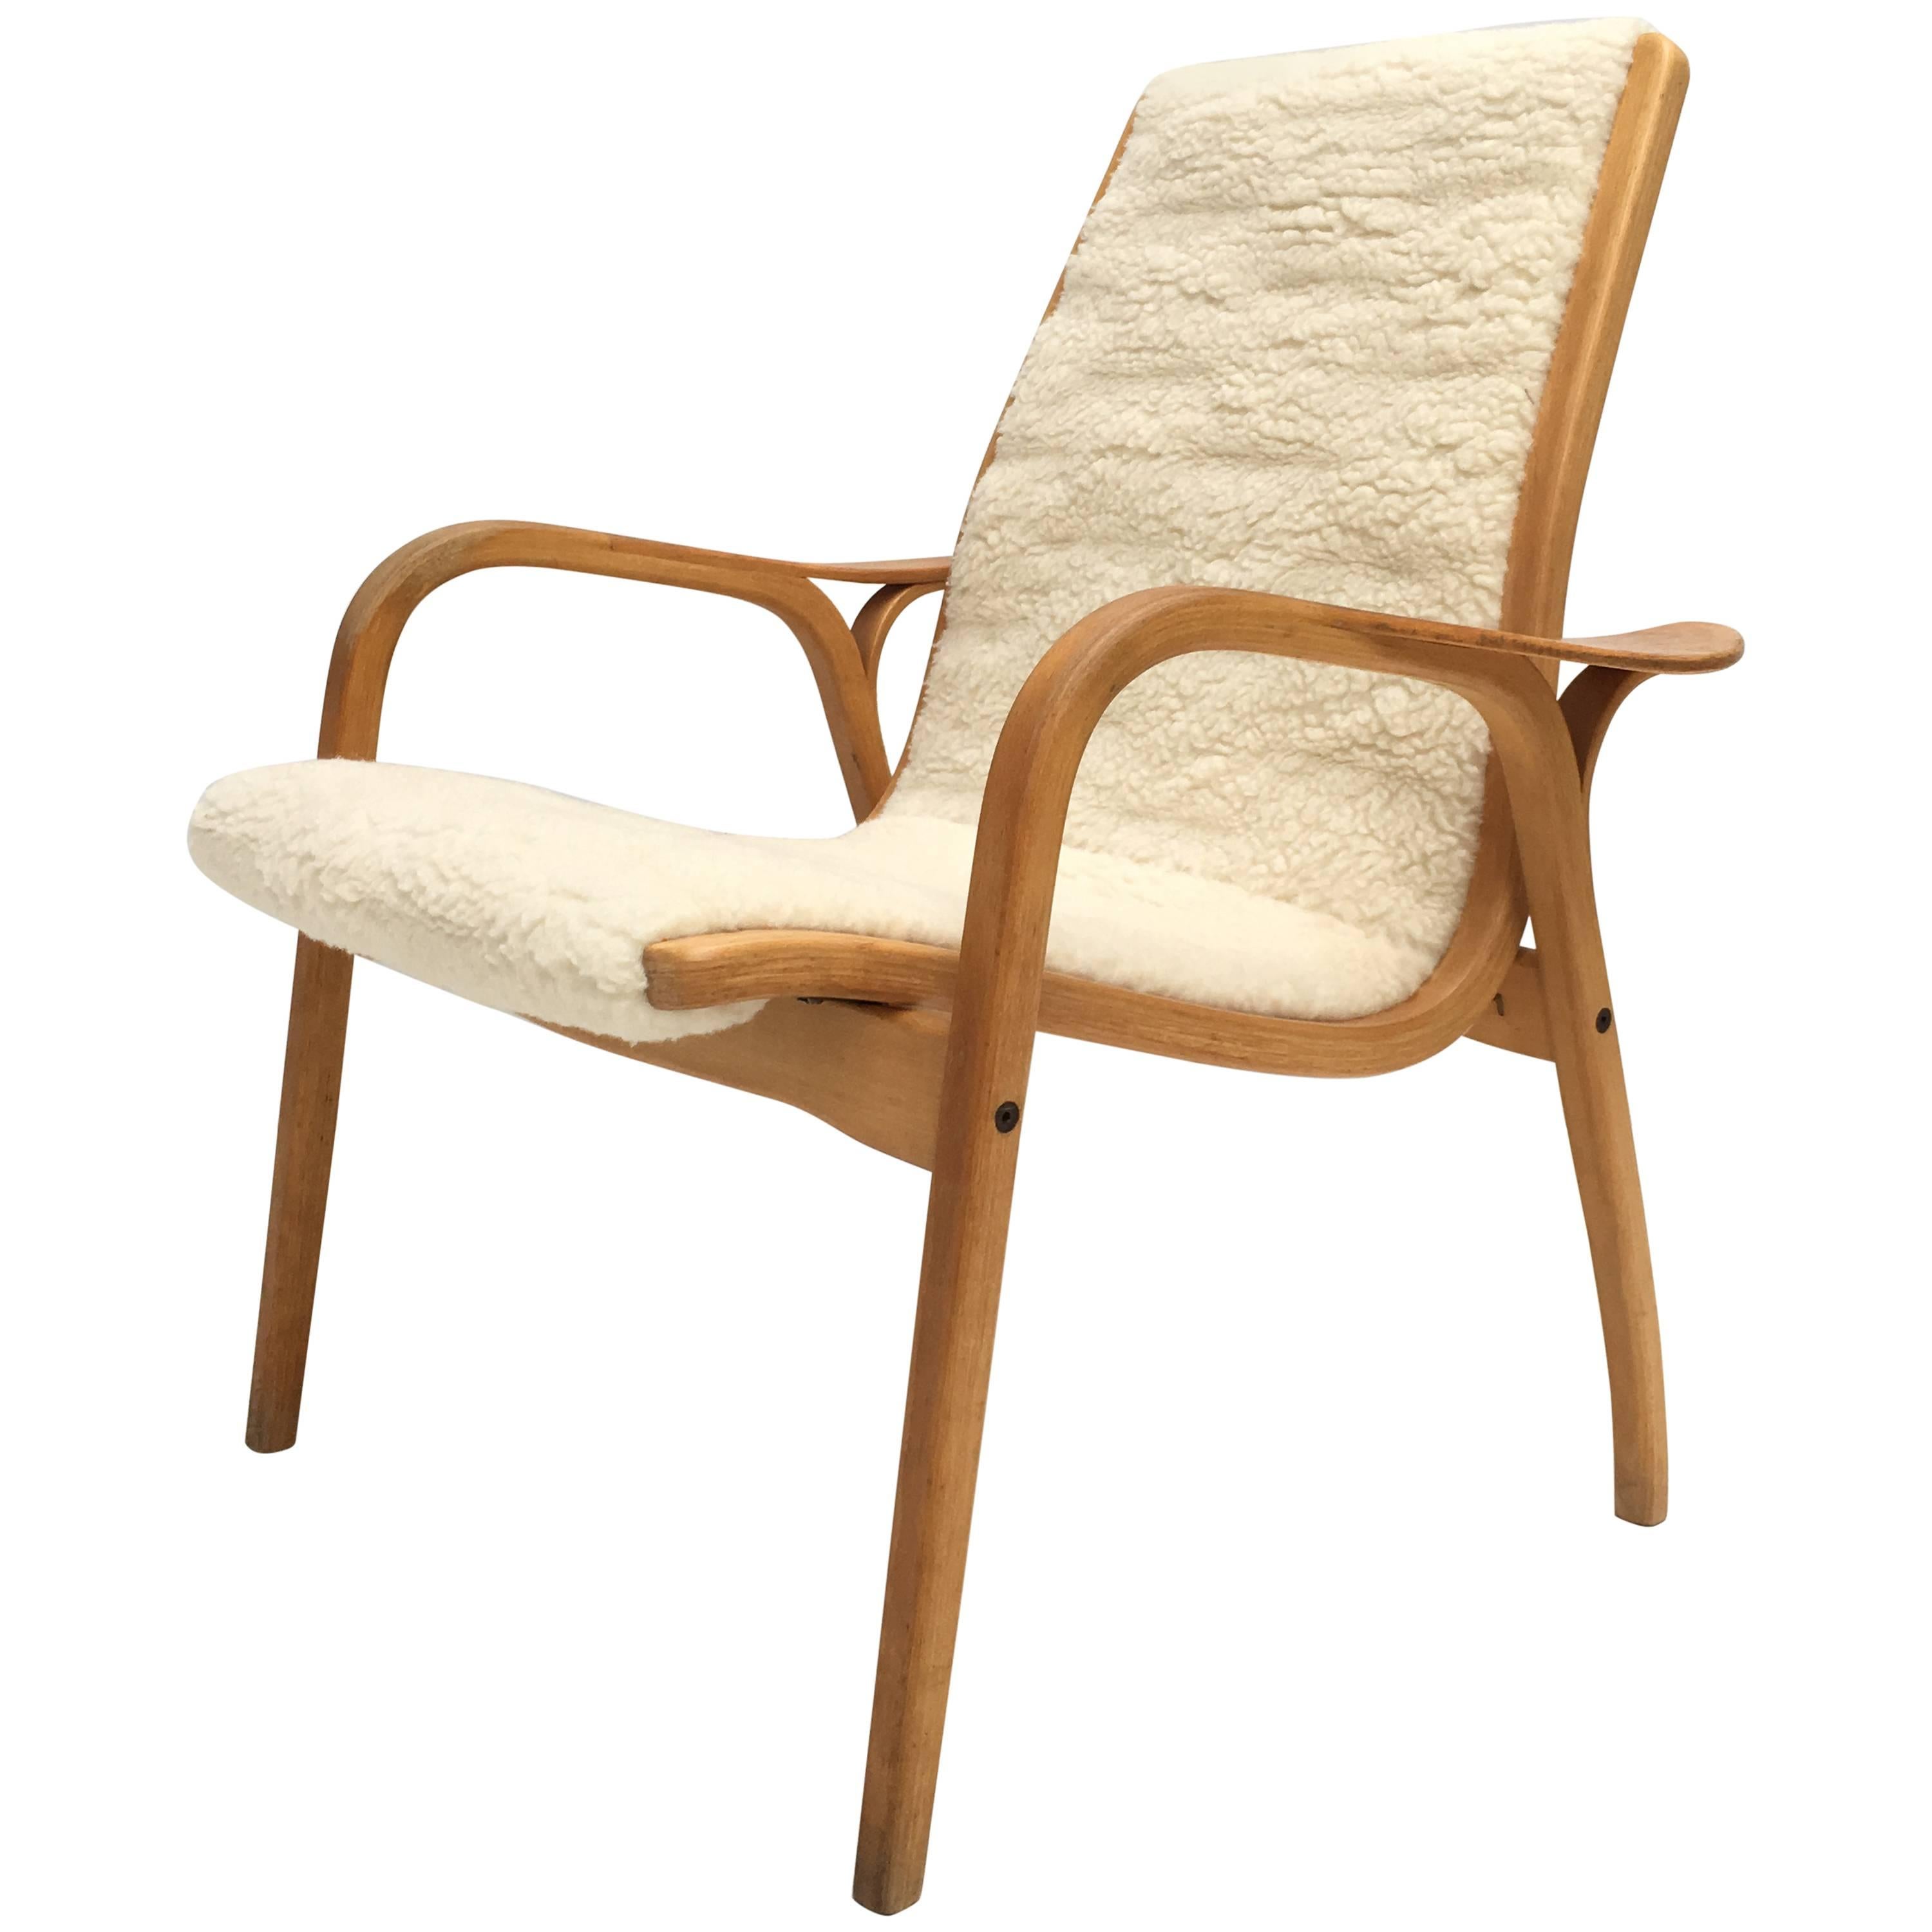 Yngve Ekström Laminated Birch and Wool Upholstered "Lamino" Chair Swedese, 1956